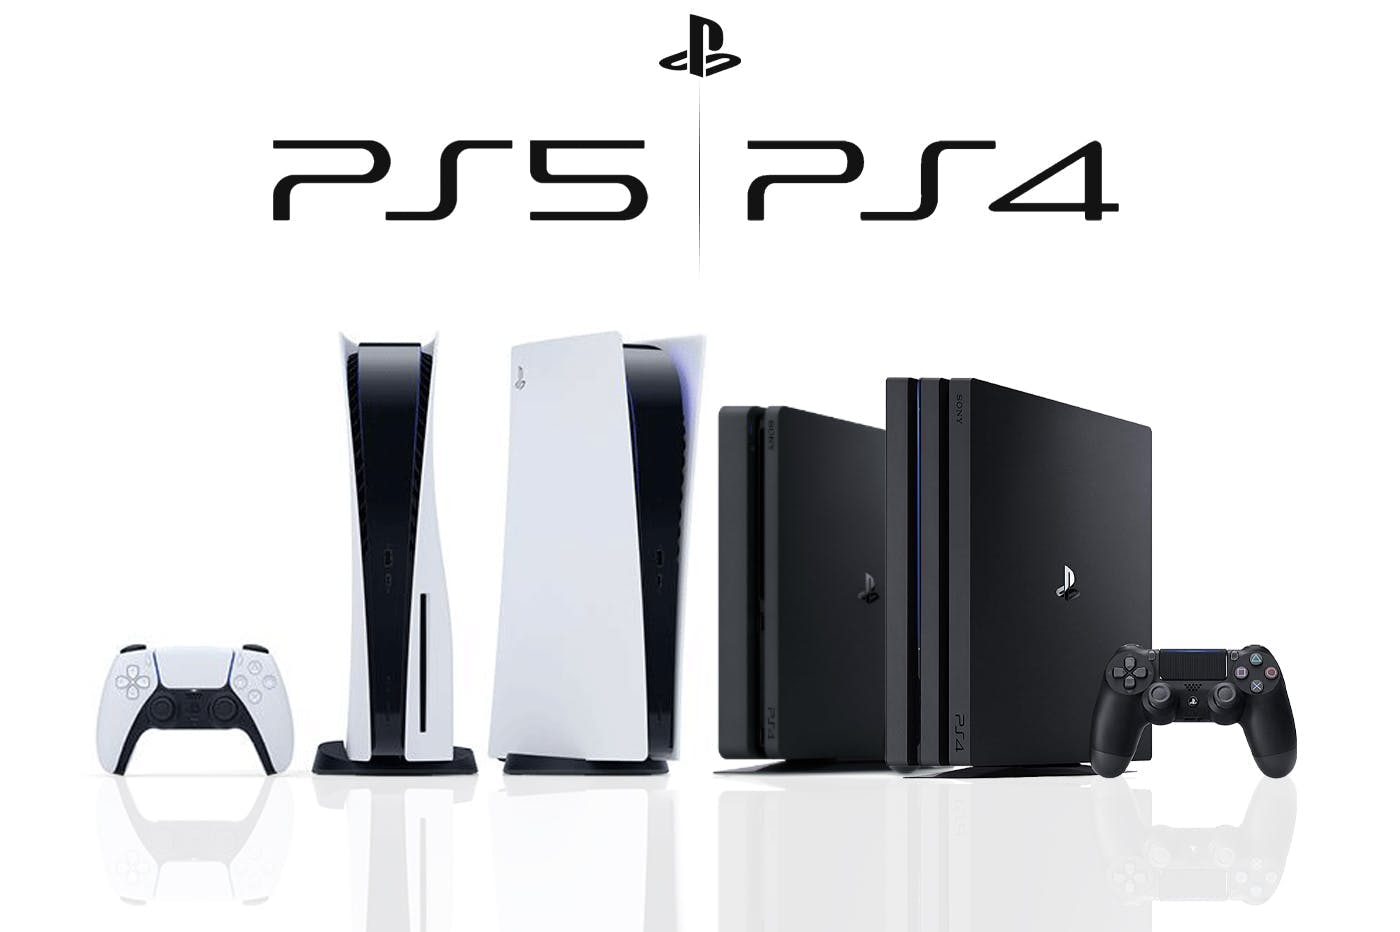 Where can I buy a PS5? Here is everything you need to know. 